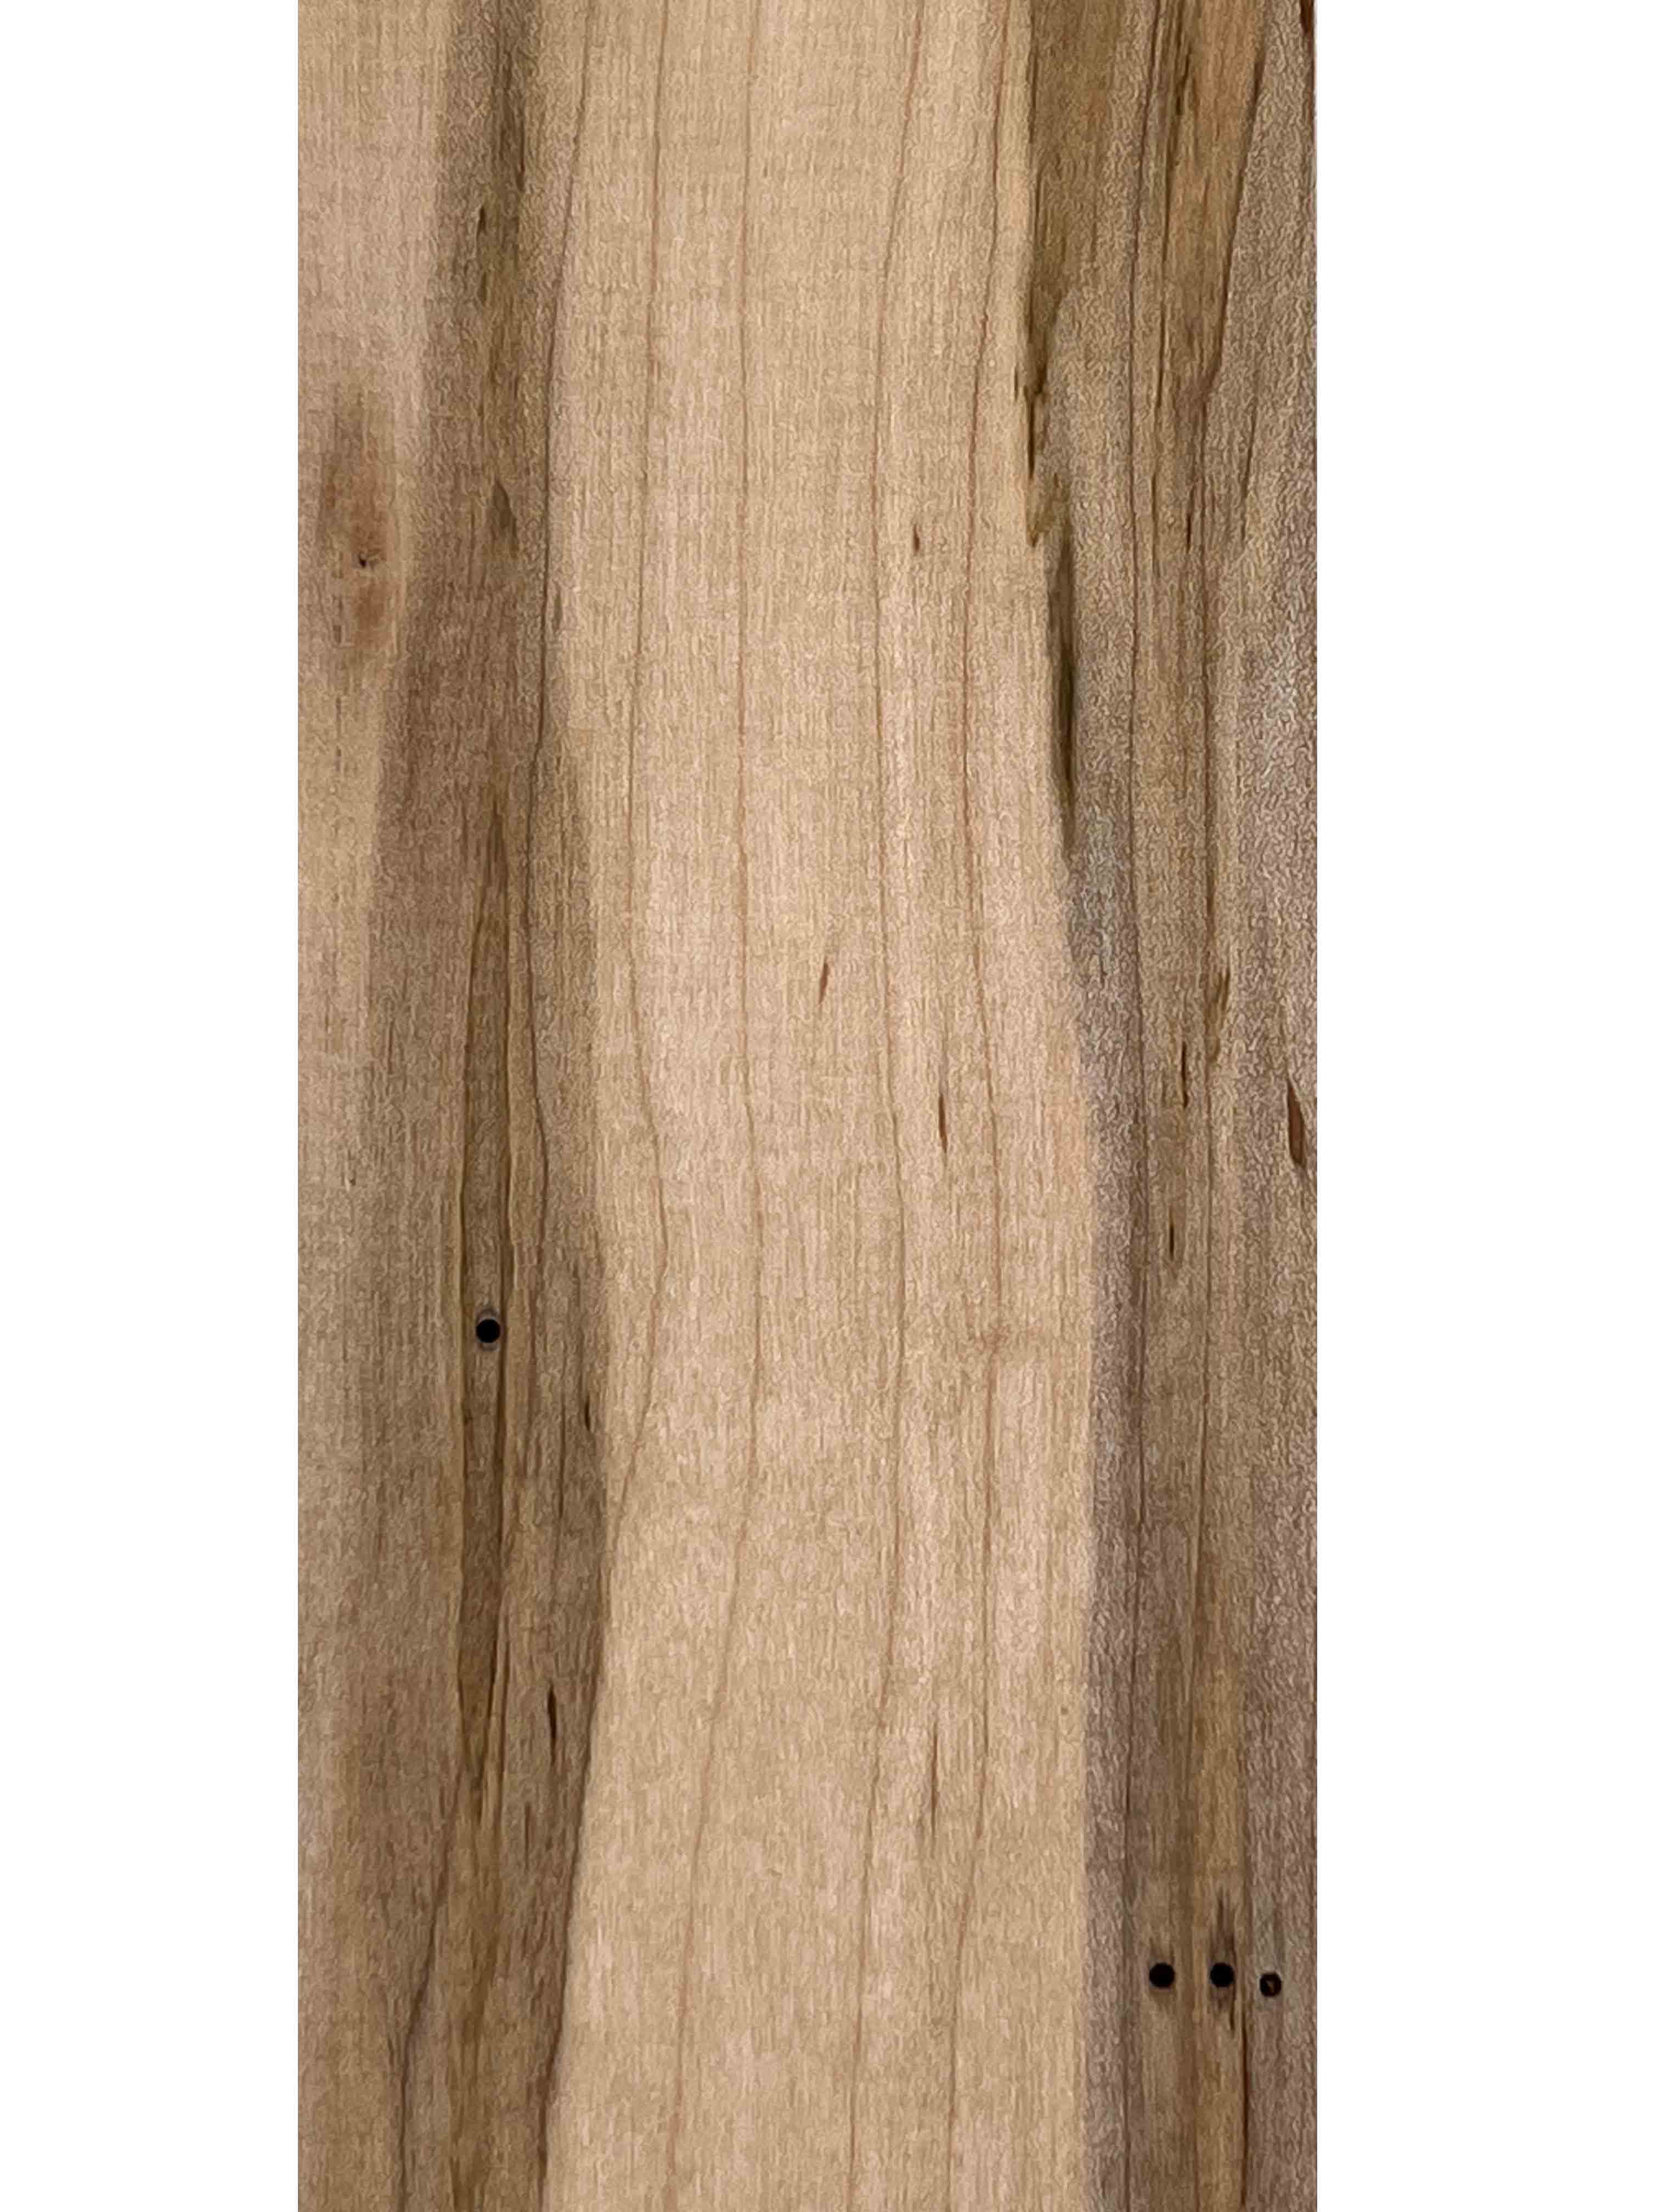 Ambrosia Maple Thin Stock Lumber Boards Wood Crafts - Exotic Wood Zone - Buy online Across USA 